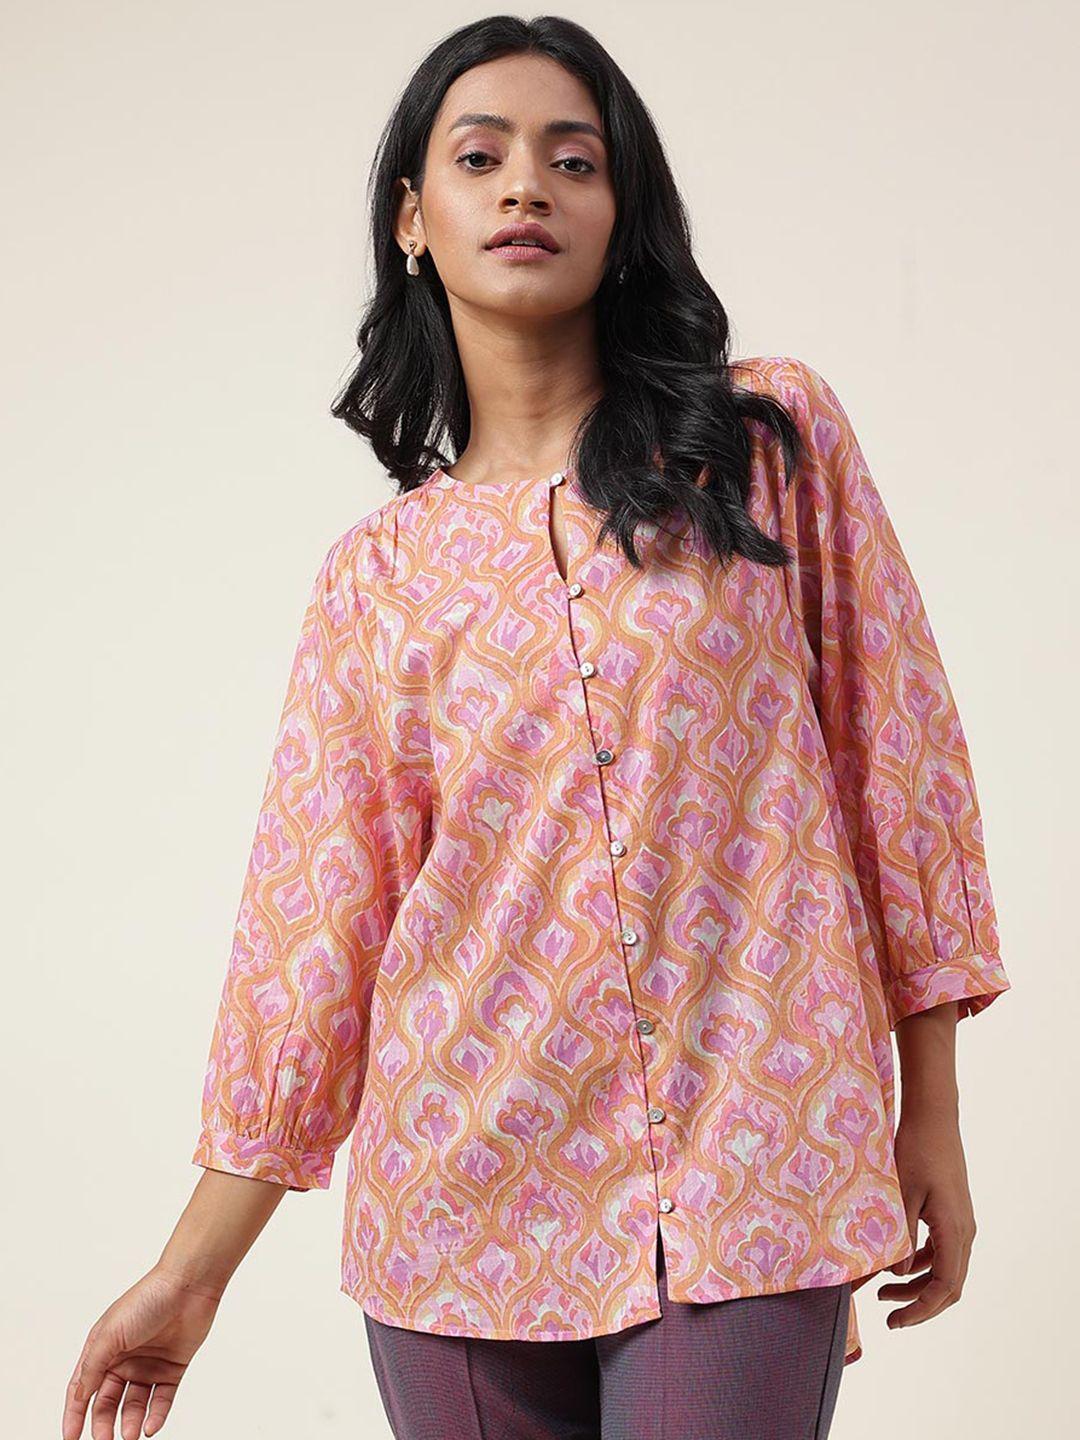 fabindia floral printed keyhole neck cotton shirt style top